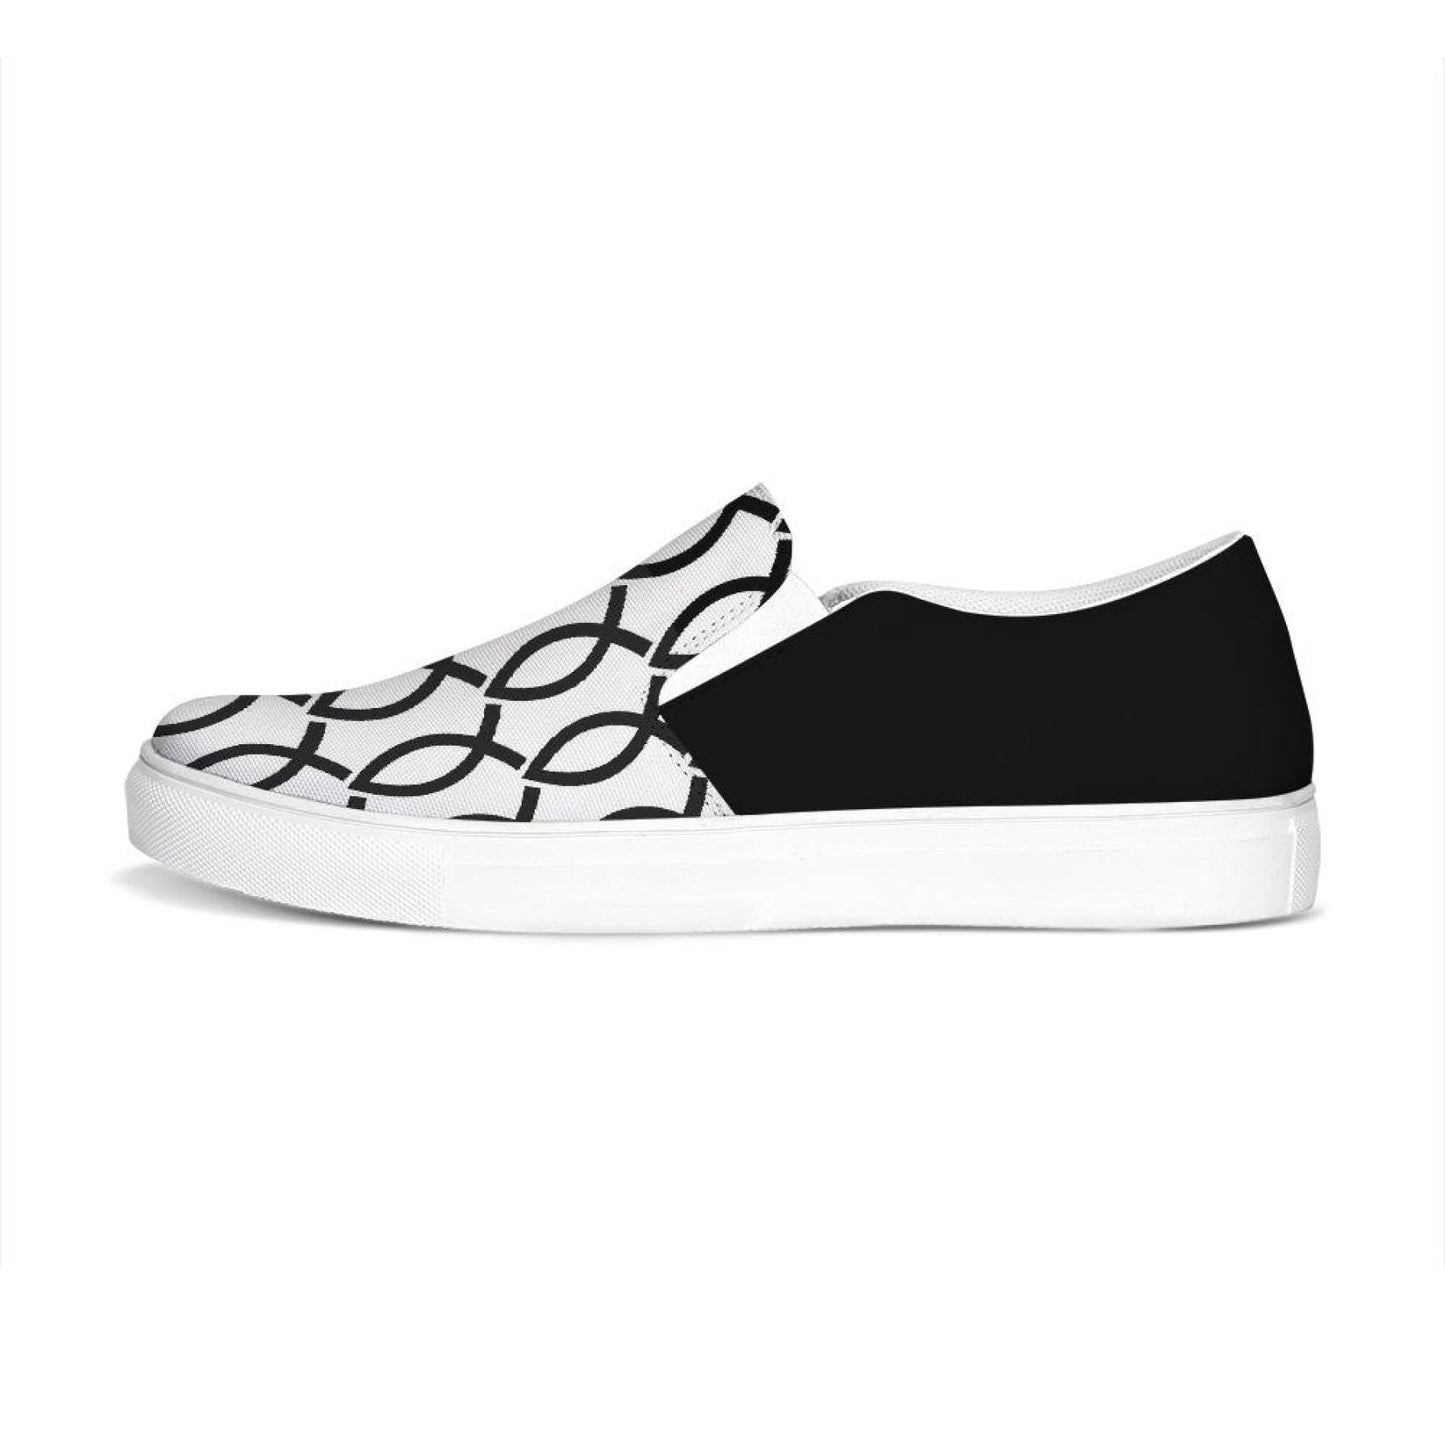 Womens Sneakers - Black & White Ichthys Style Low Top Slip-on Canvas